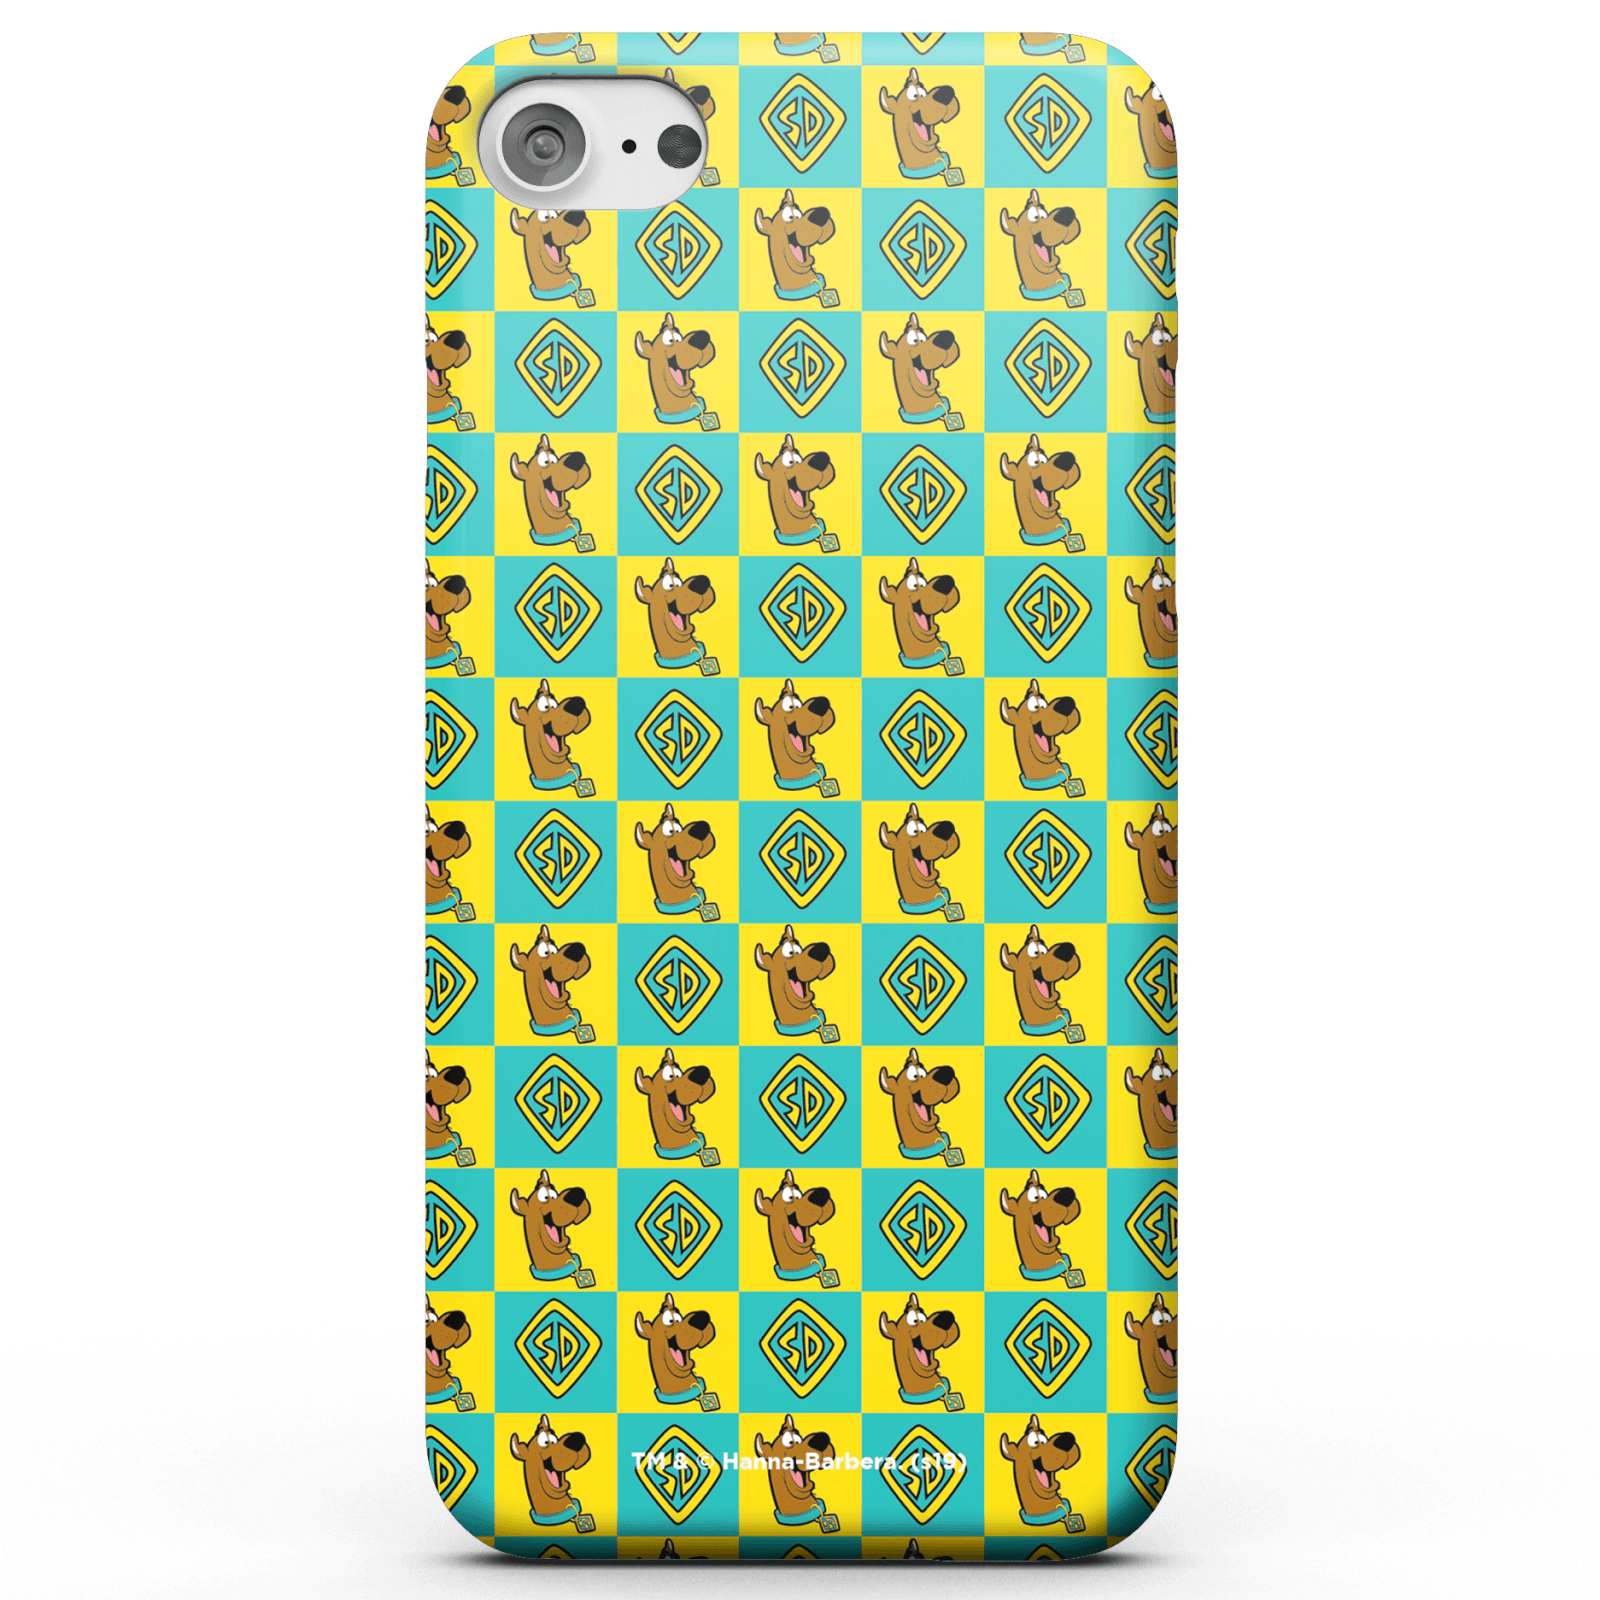 Scooby Doo Pattern Phone Case for iPhone and Android - iPhone 6S - Snap Case - Matte